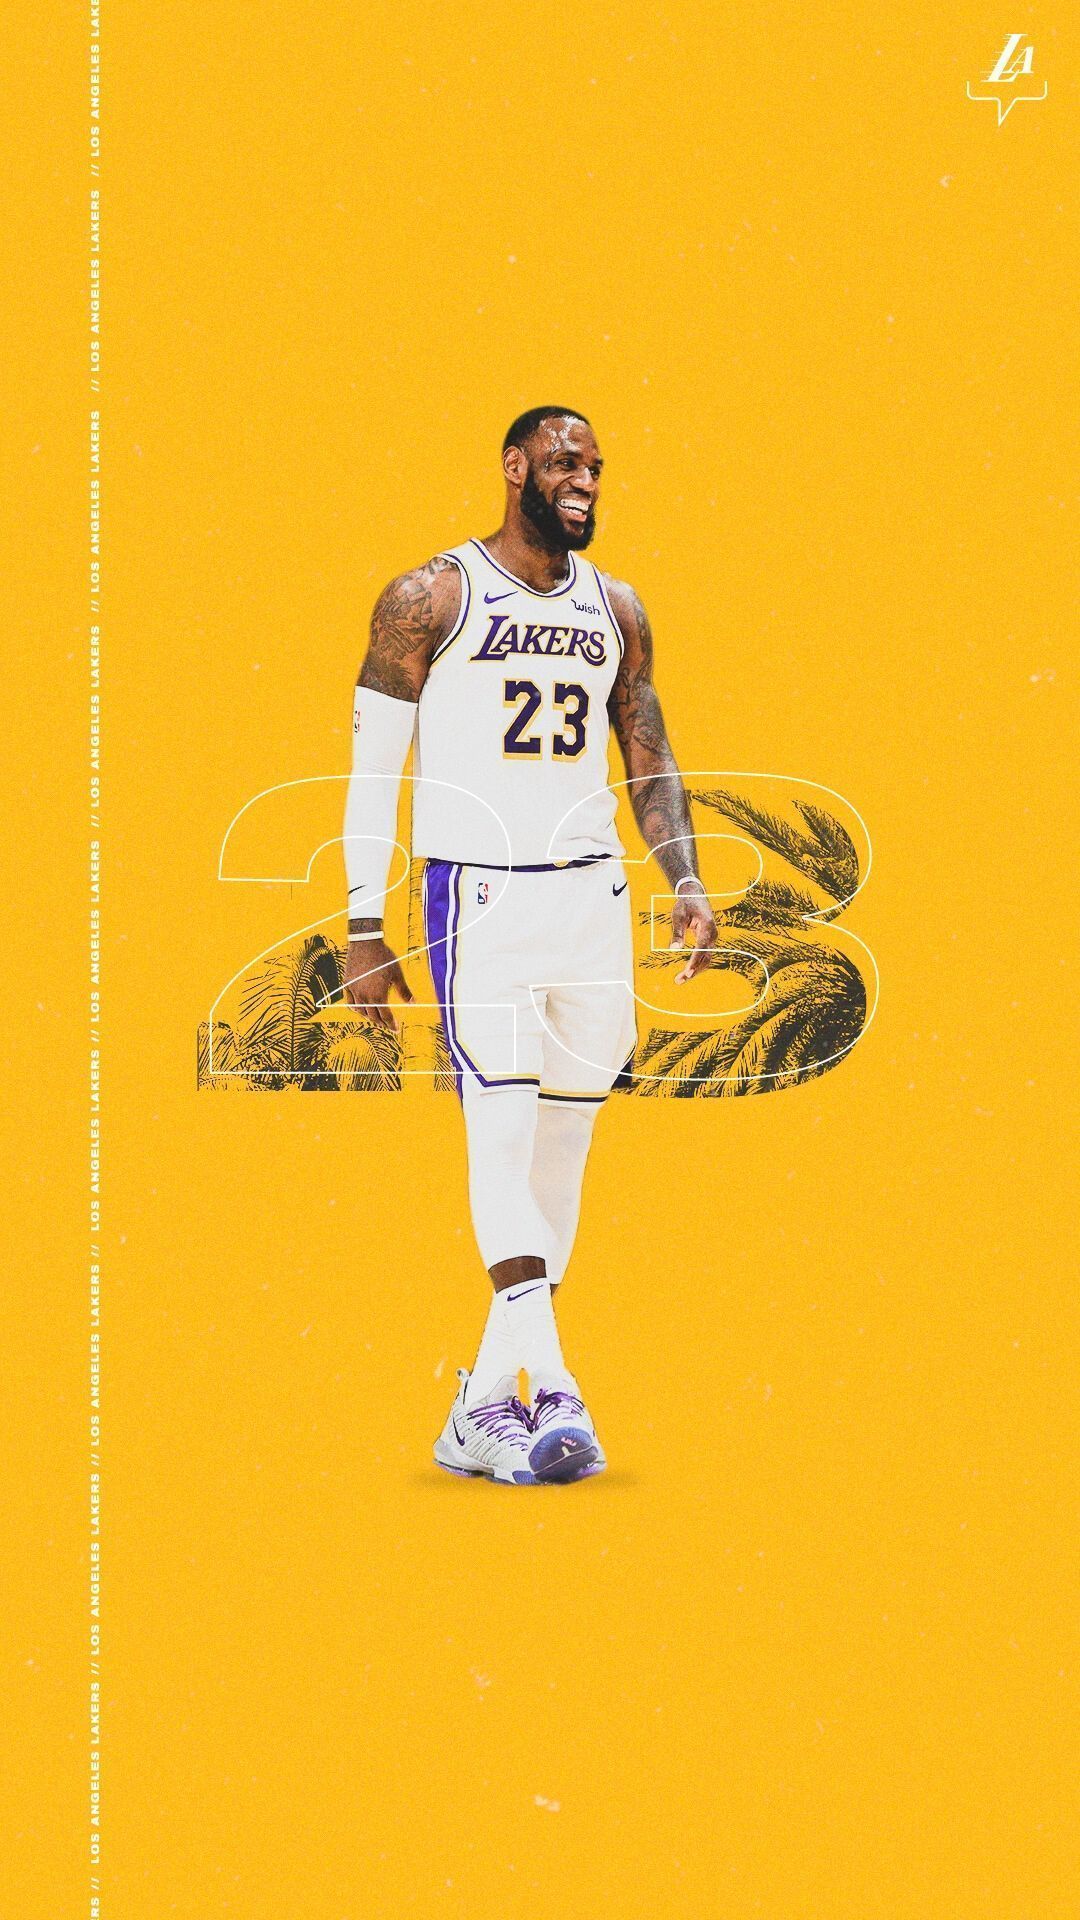 Lebron James Lakers Wallpaper iPhone with high-resolution 1080x1920 pixel. You can use this wallpaper for your iPhone 5, 6, 7, 8, X, XS, XR backgrounds, Mobile Screensaver, or iPad Lock Screen - NBA, Los Angeles Lakers, Lebron James